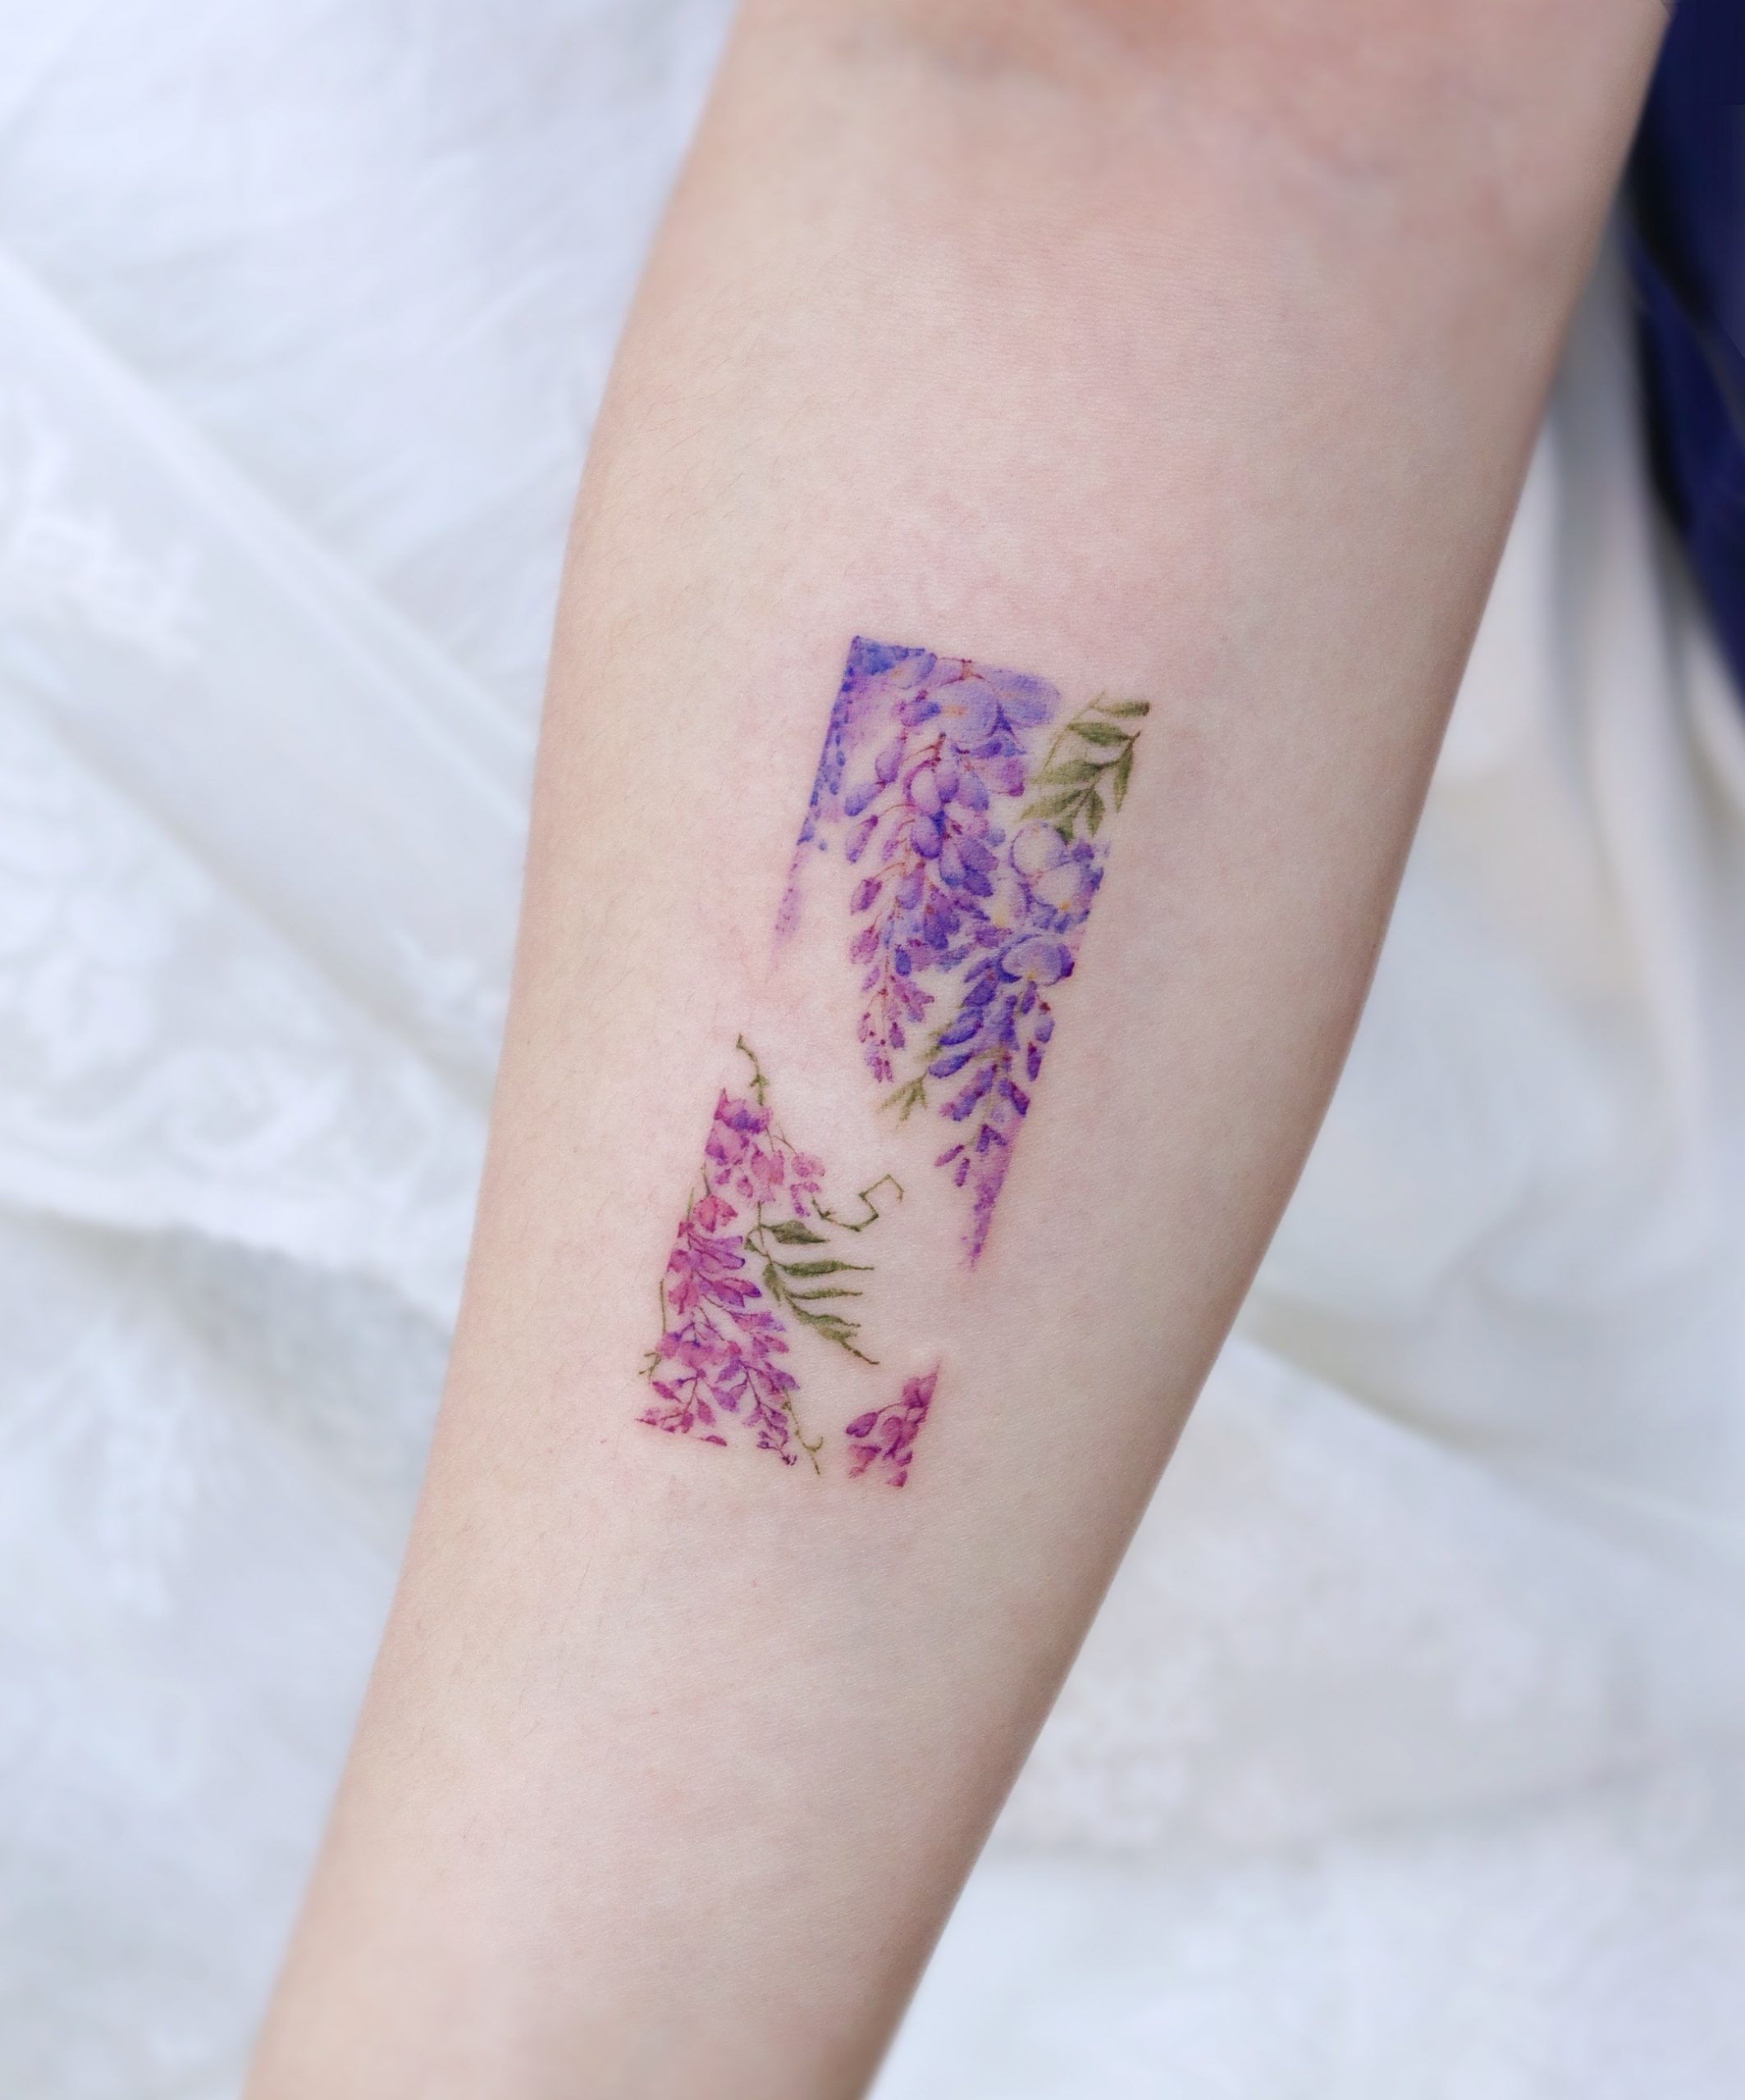 Floral Tattoos Archives - Things&Ink